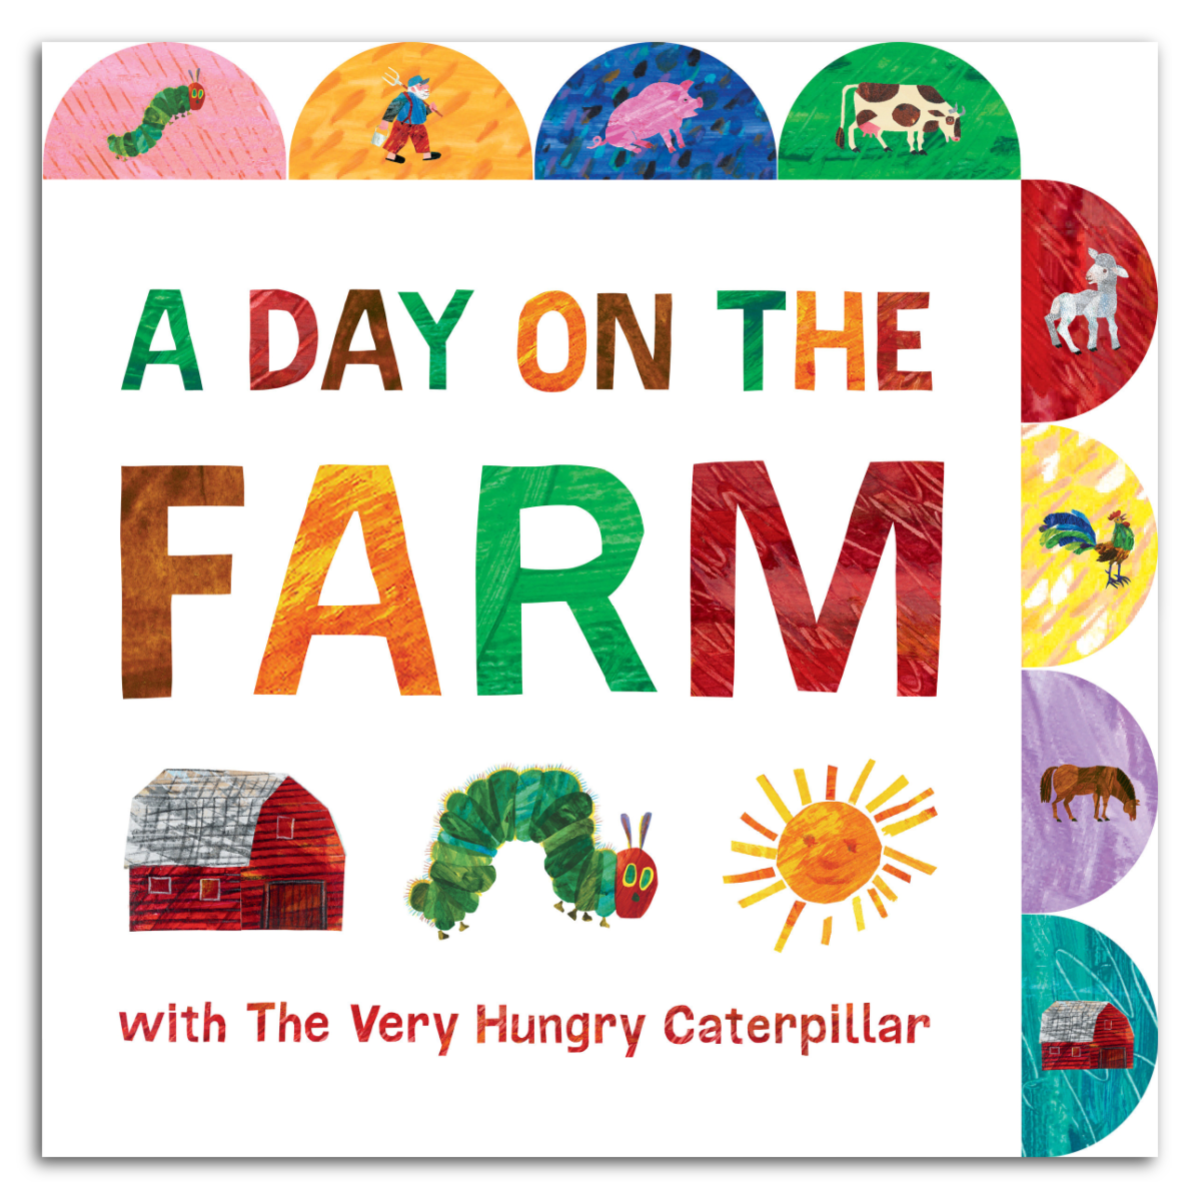 A Day on the Farm with The Very Hungry Caterpillar